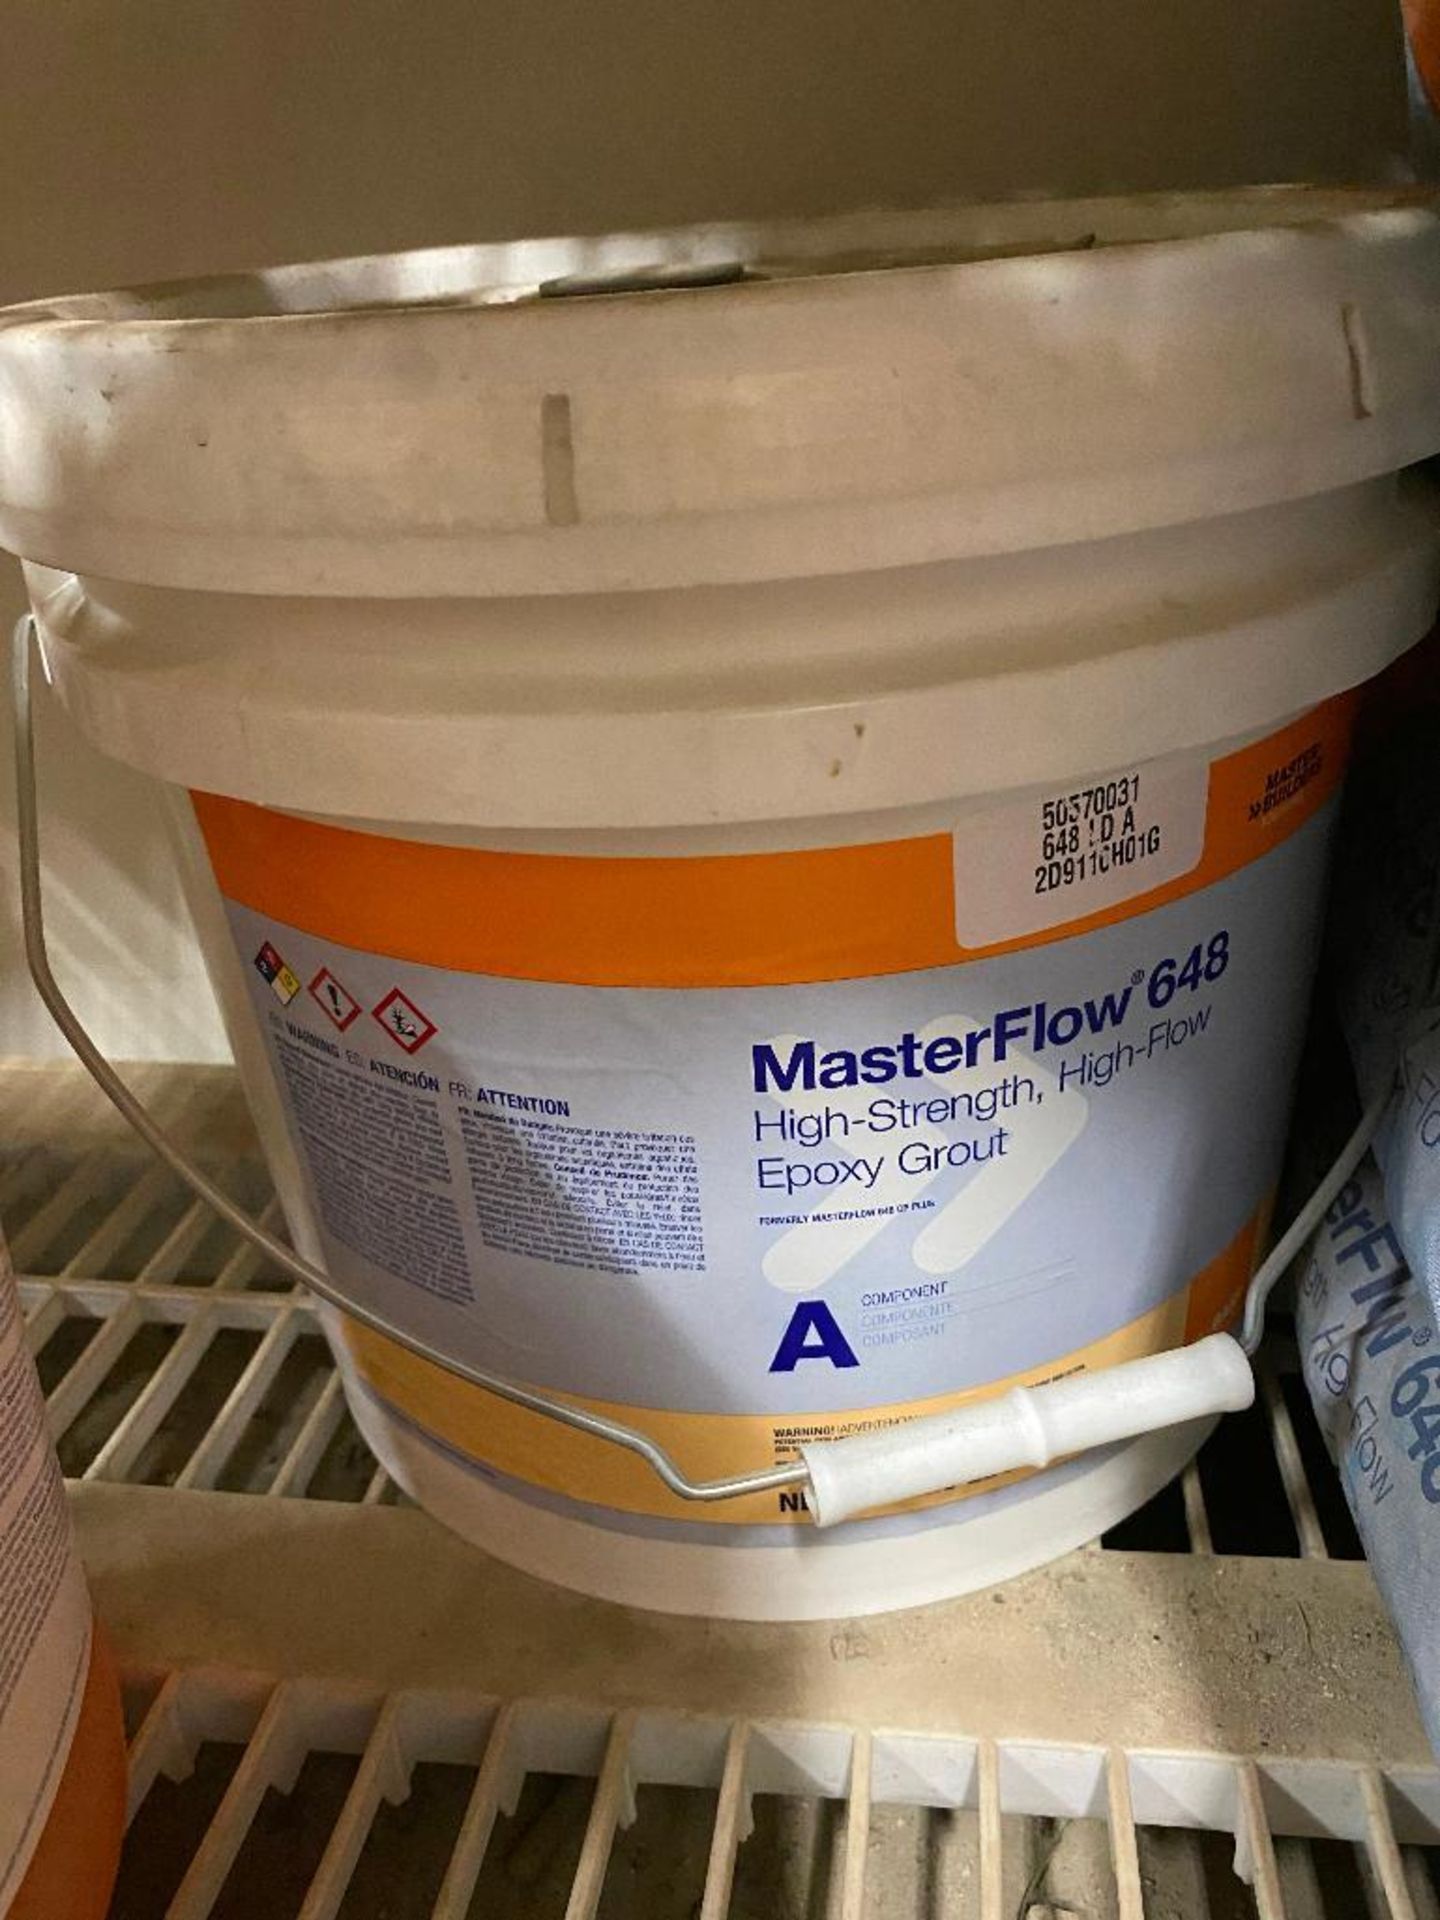 Lot of Asst. MasterFlow 648 Epoxy Grout Products - Image 3 of 4